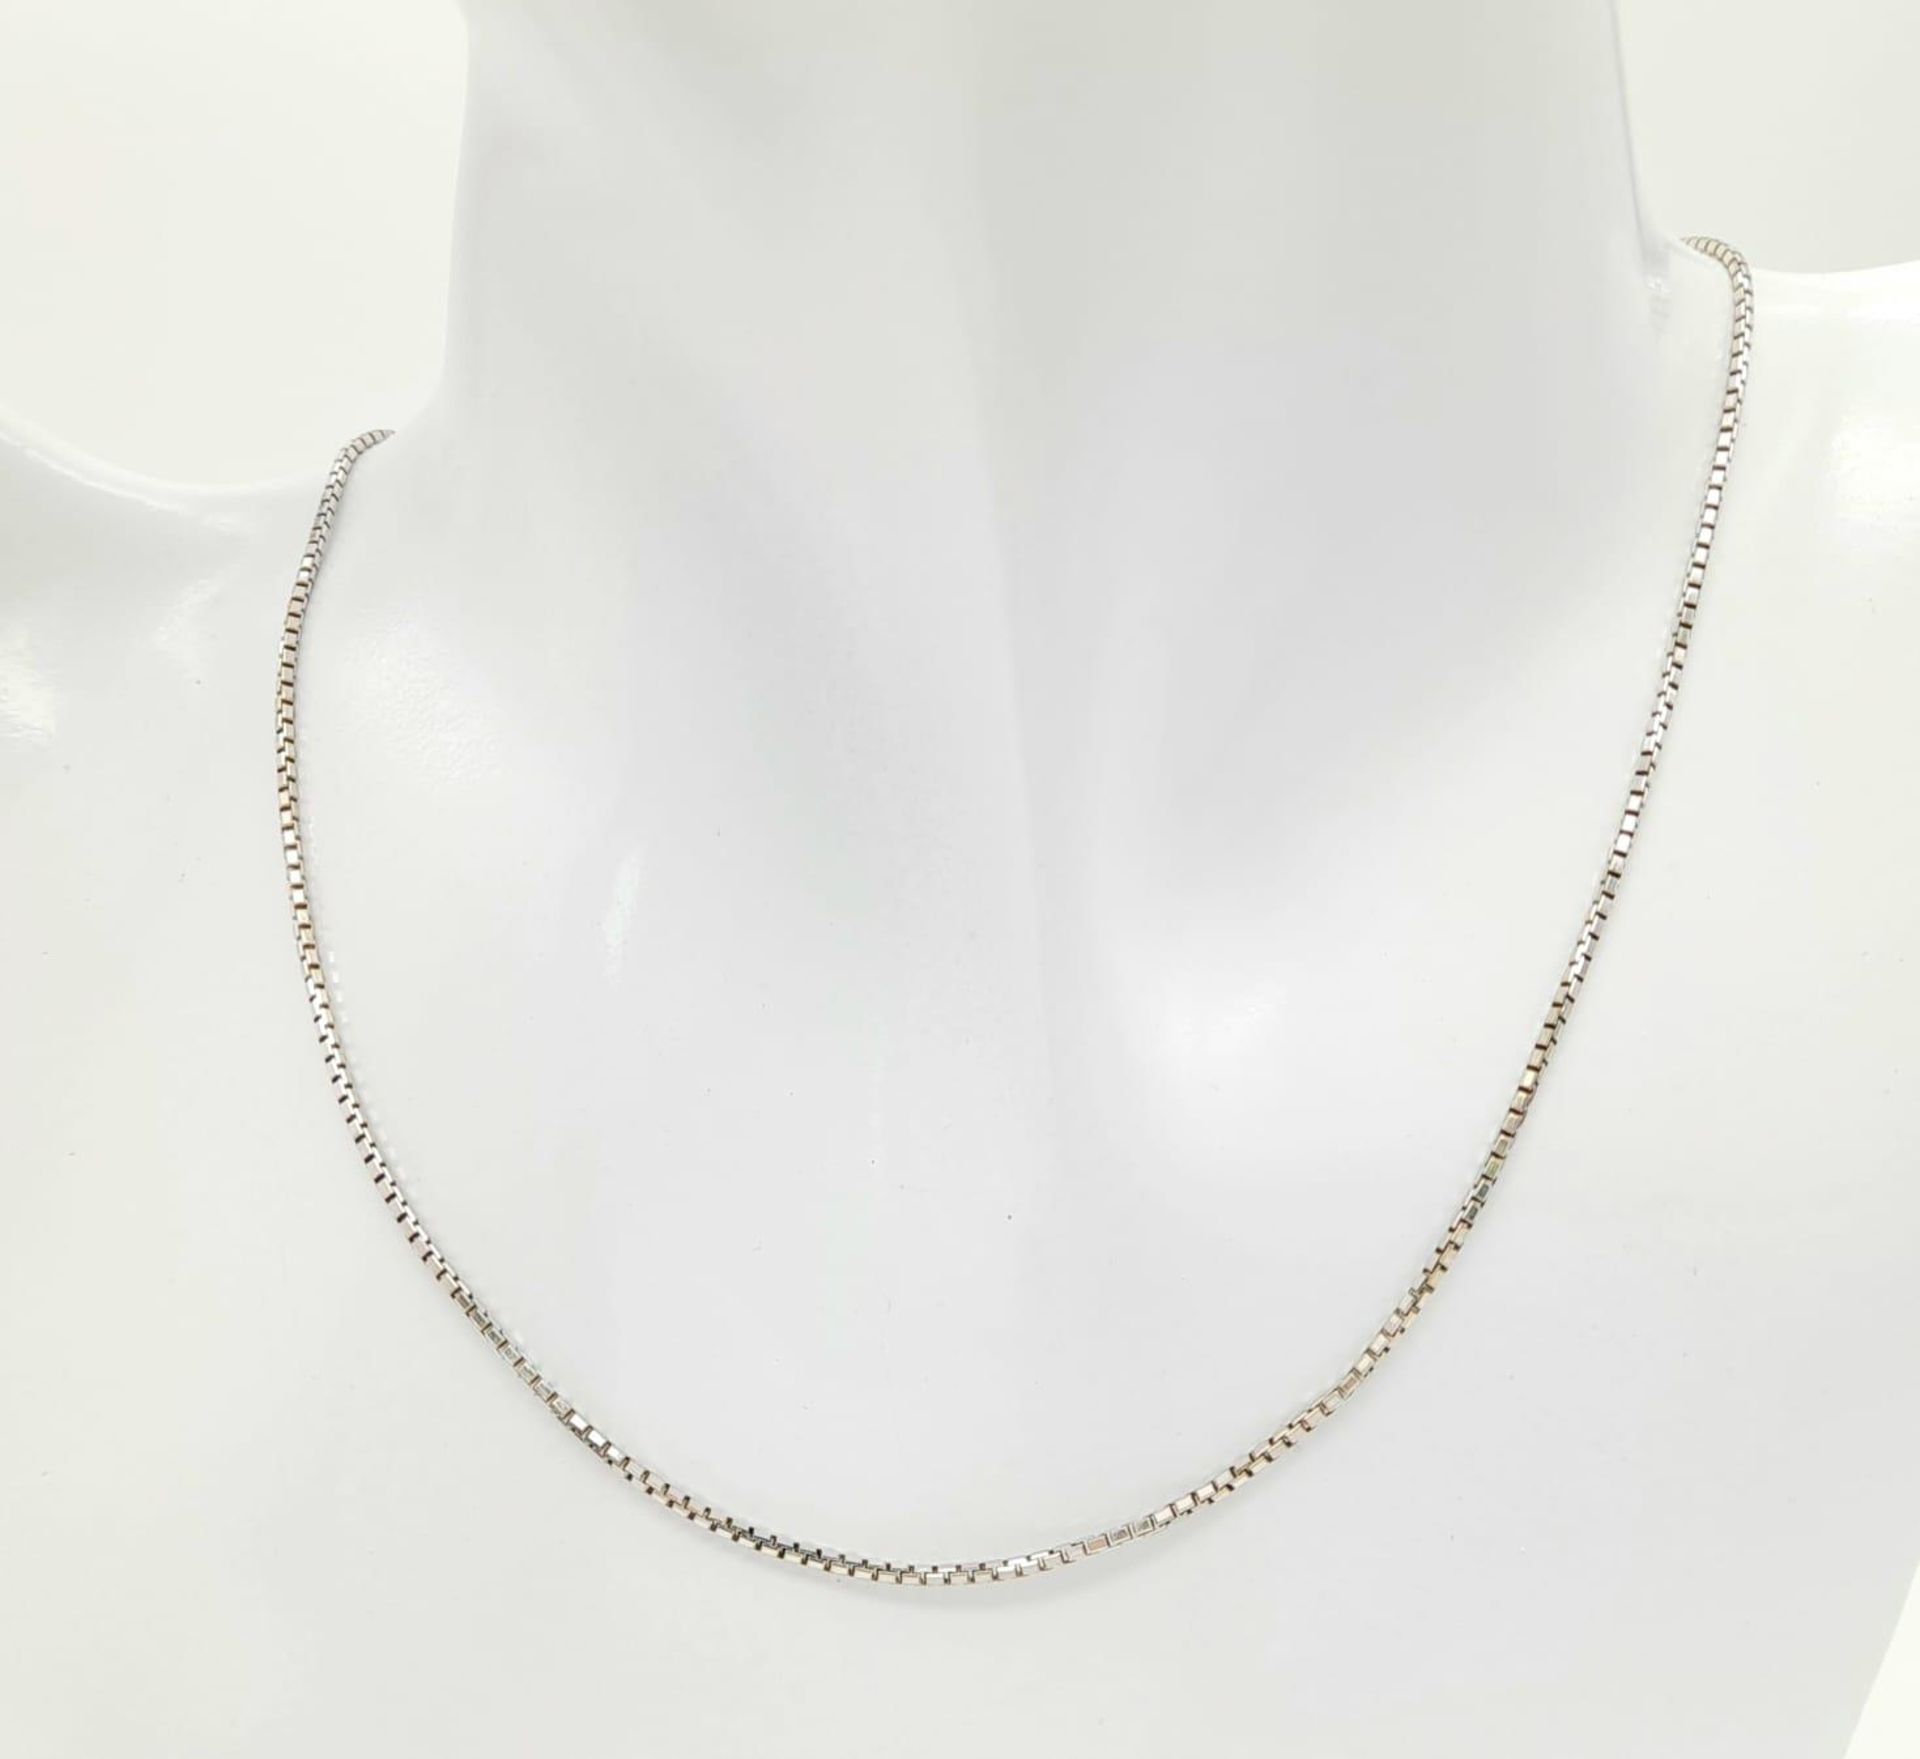 An 18K White Gold Link Necklace. Small rectangular links. 40cm. 4.56g weight. - Image 2 of 9